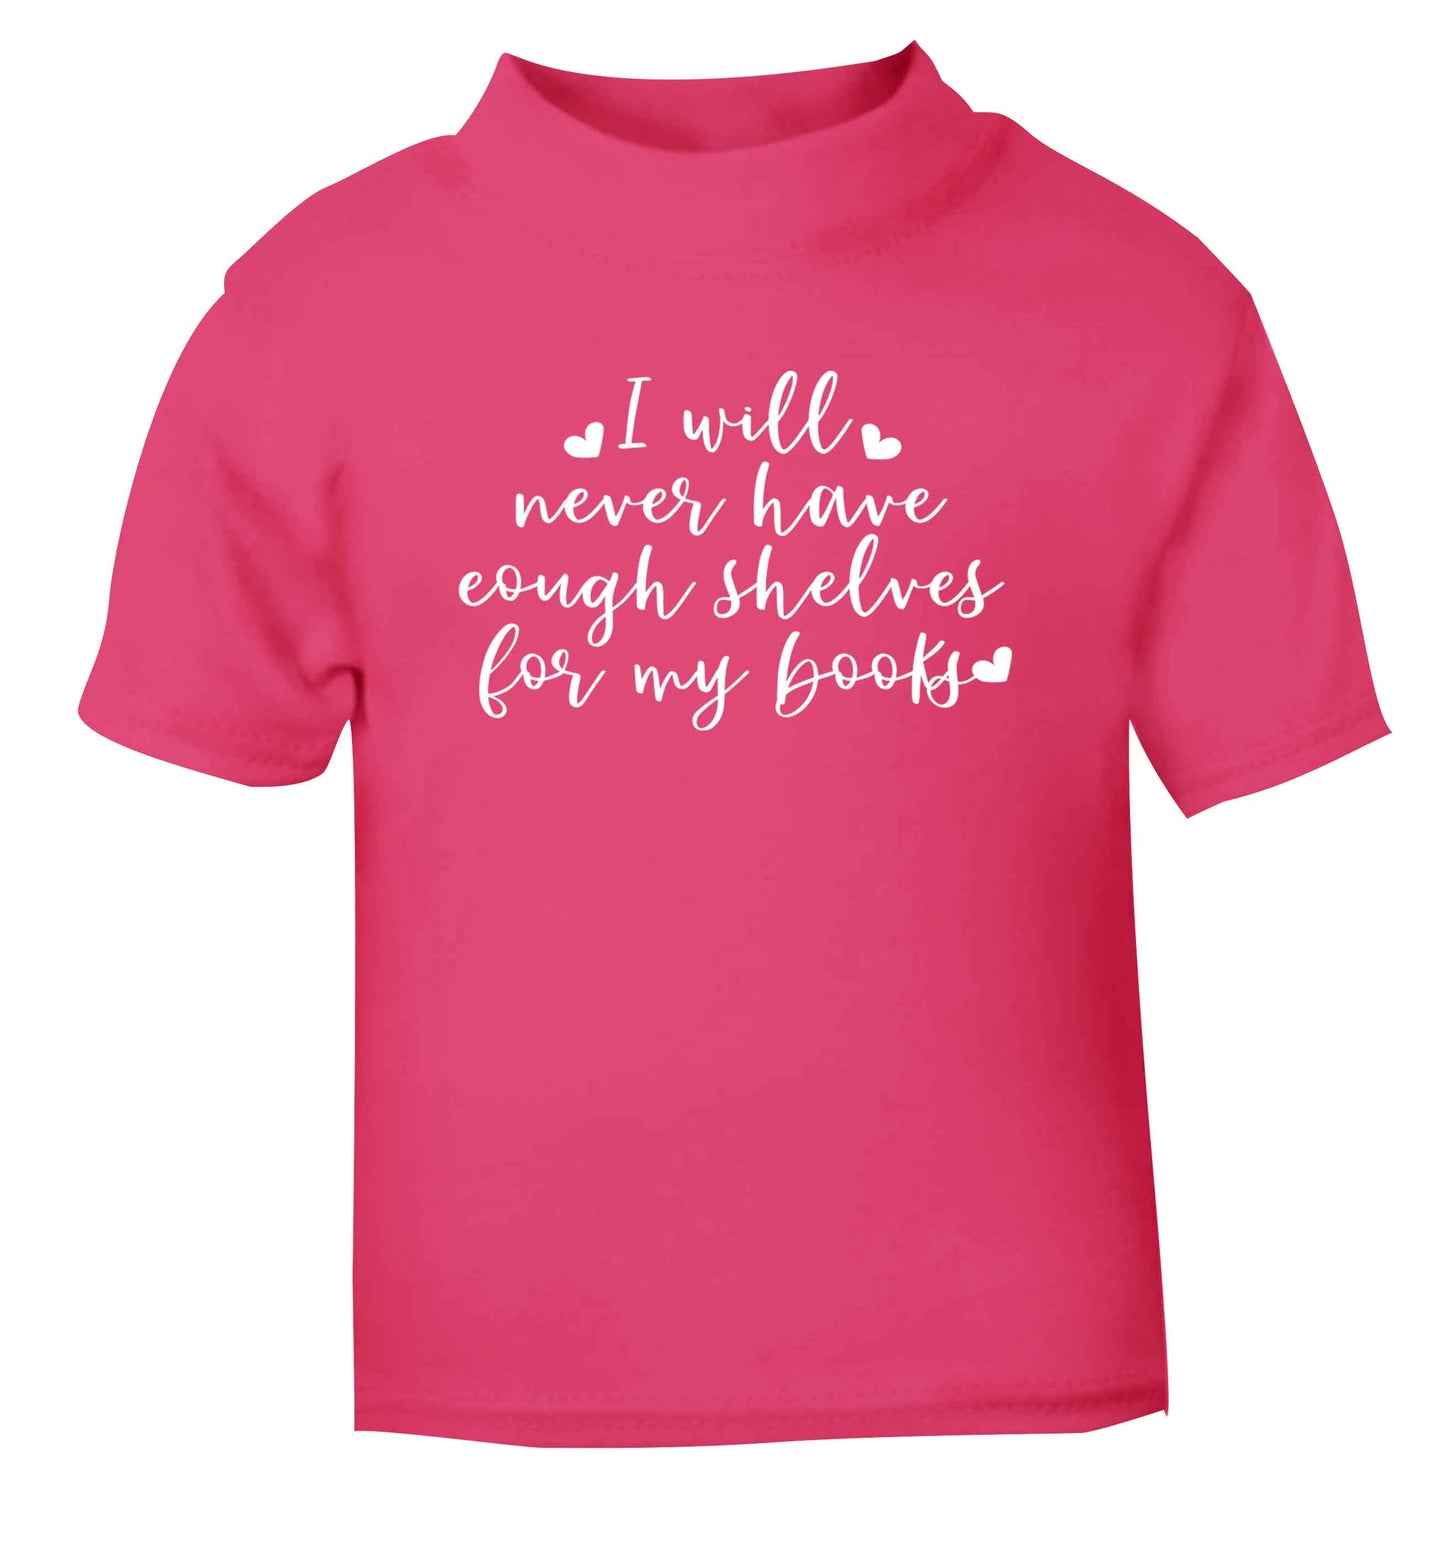 I will never have enough shelves for my books pink Baby Toddler Tshirt 2 Years